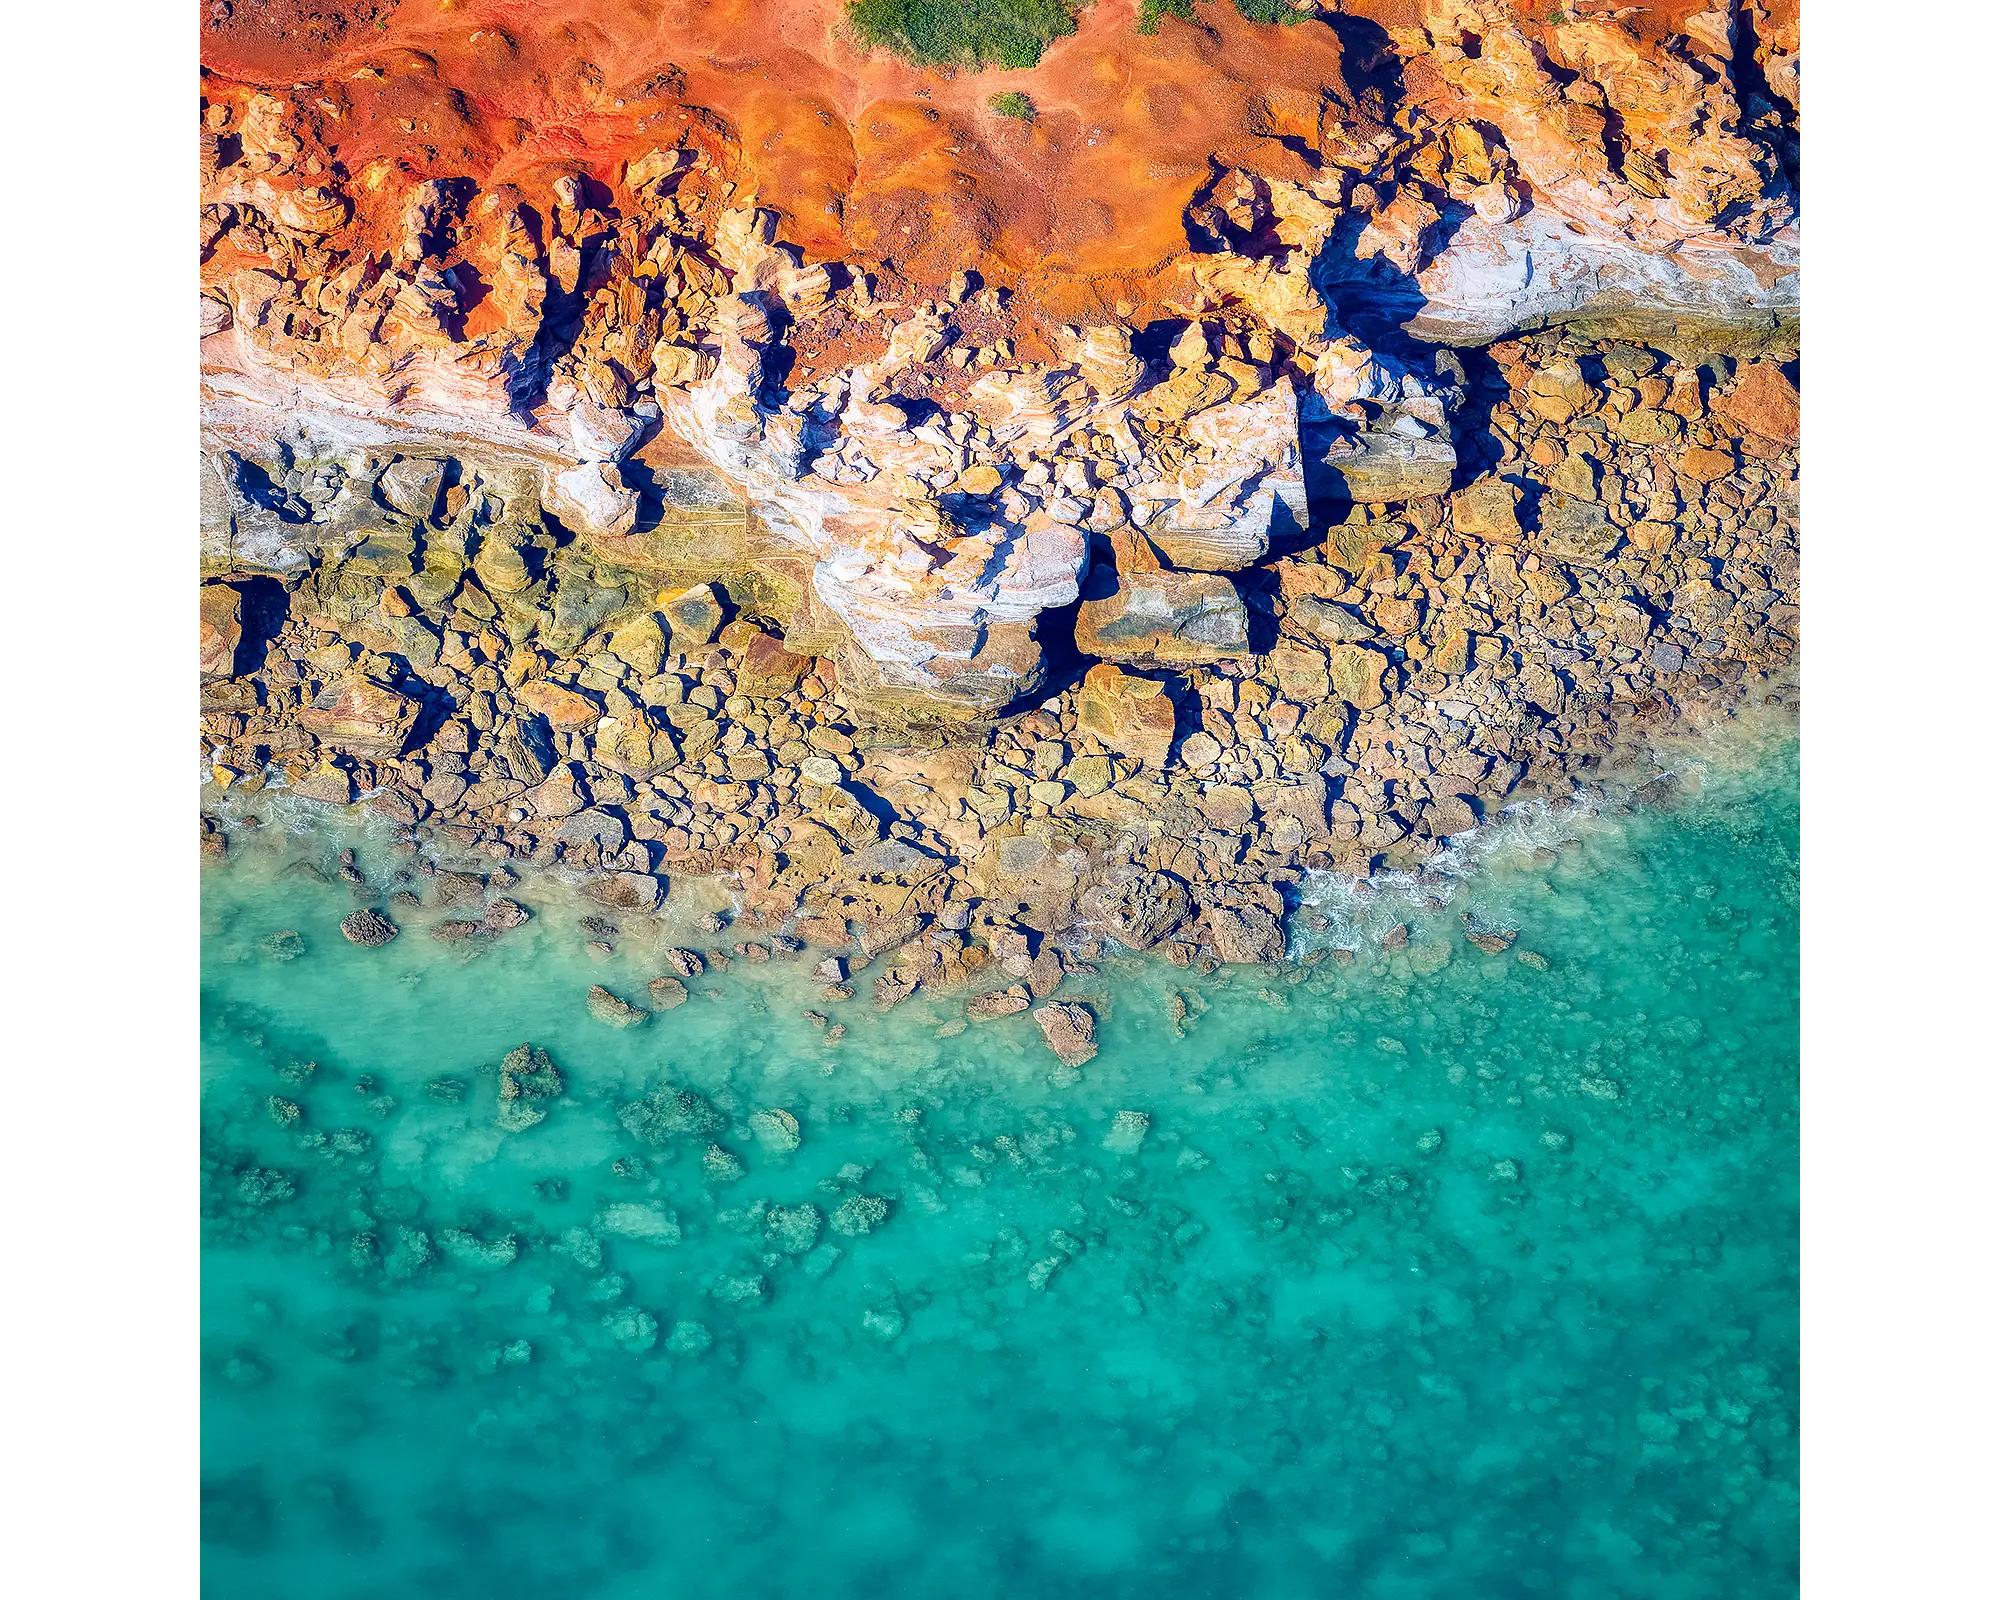 Gantheaume Point viewed from above, Broome, Western Australia.